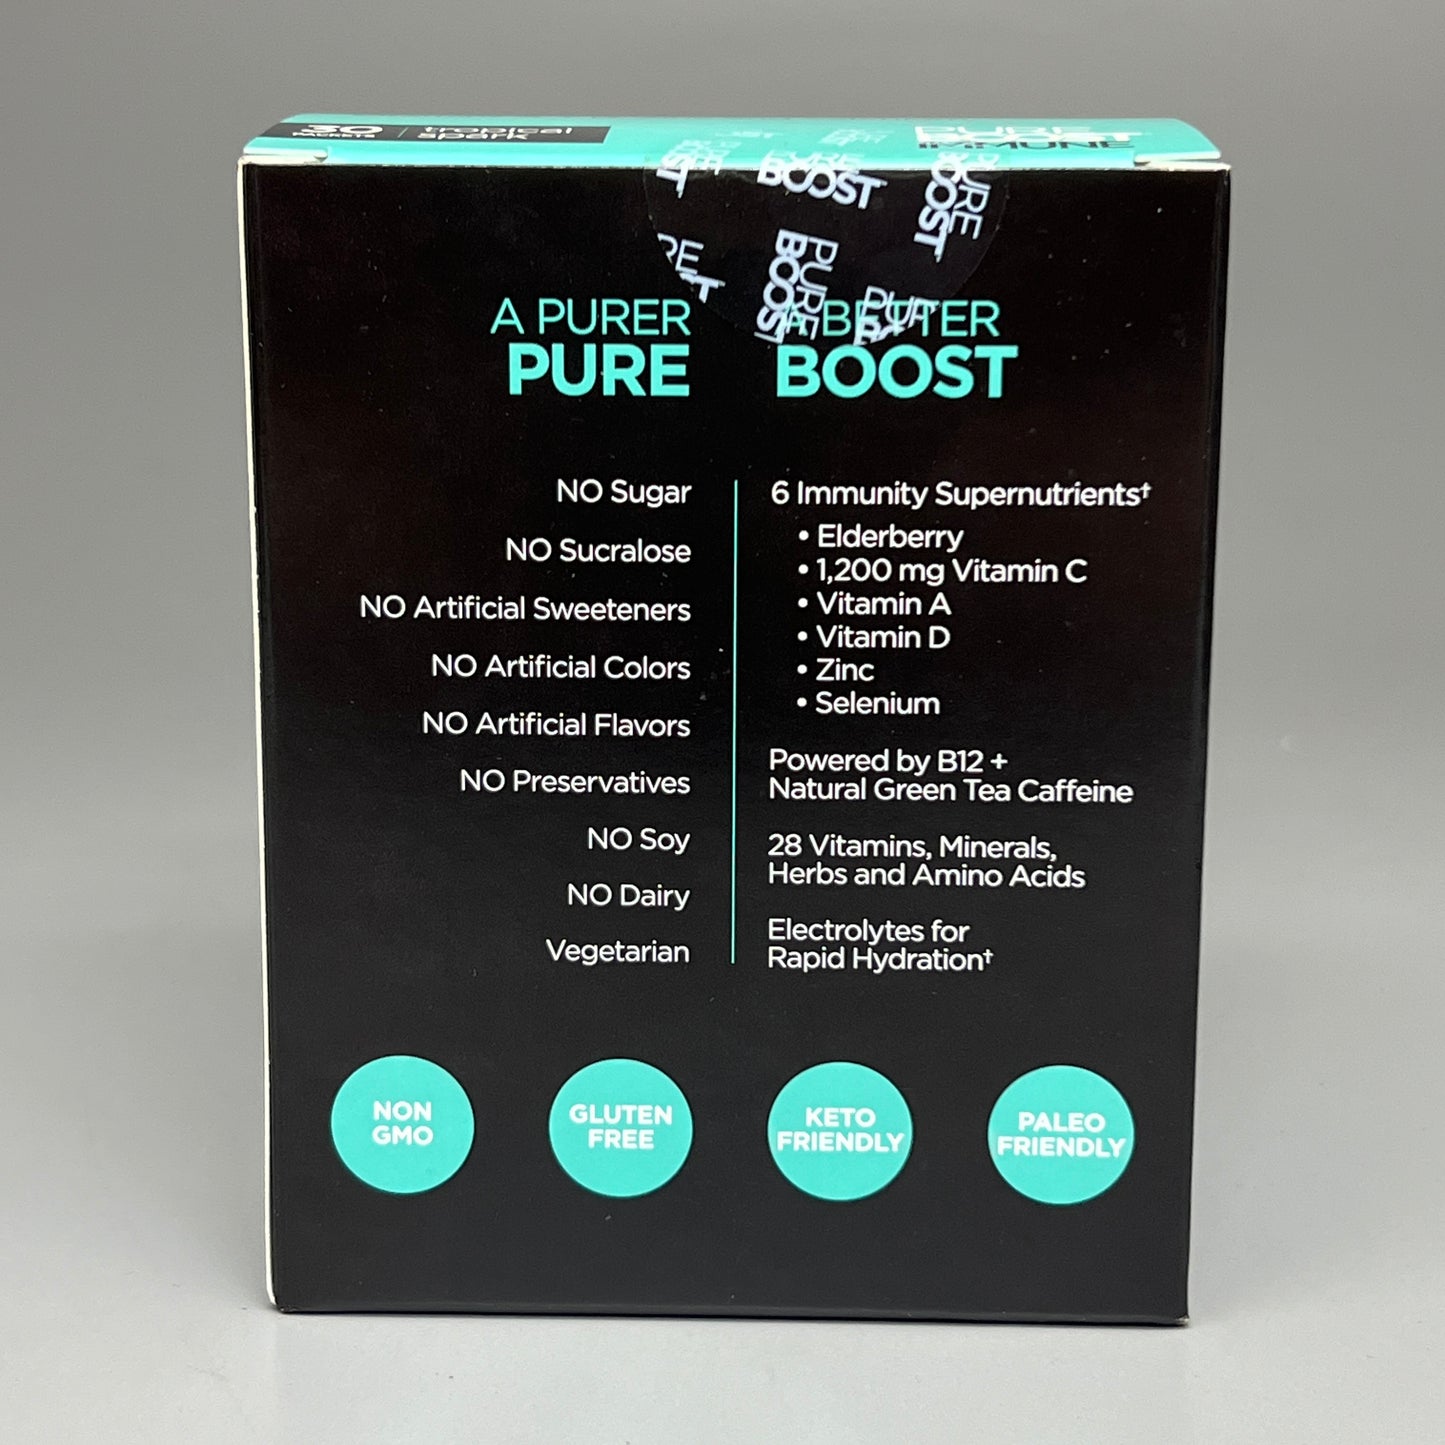 PUREBOOST IMMUNE Antioxidant Energy Mix 30 Packets Tropical Spark 06/24 (New)